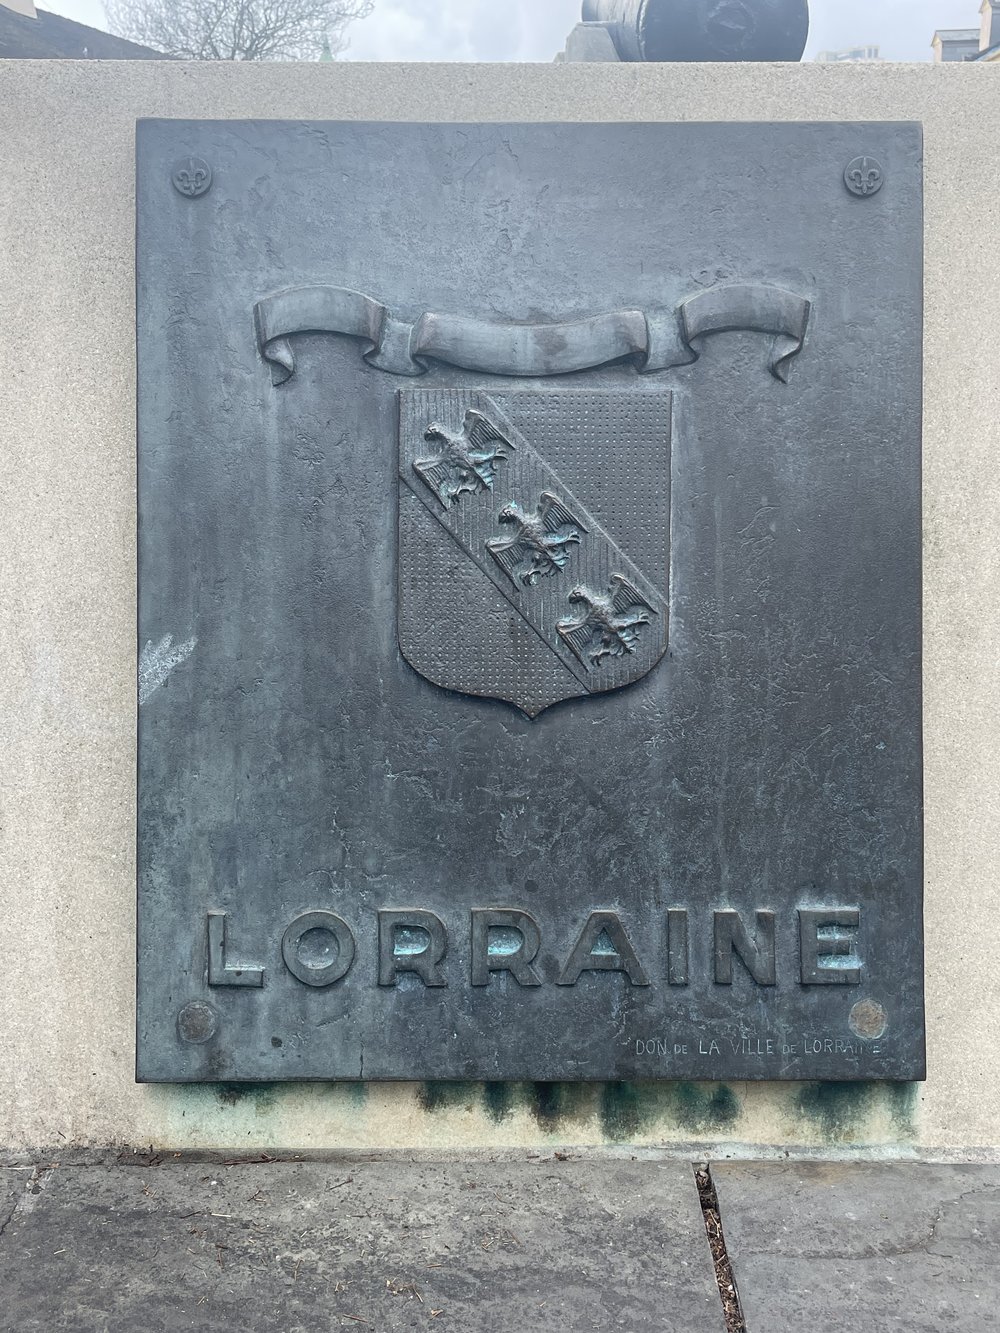 The Shield of Lorraine